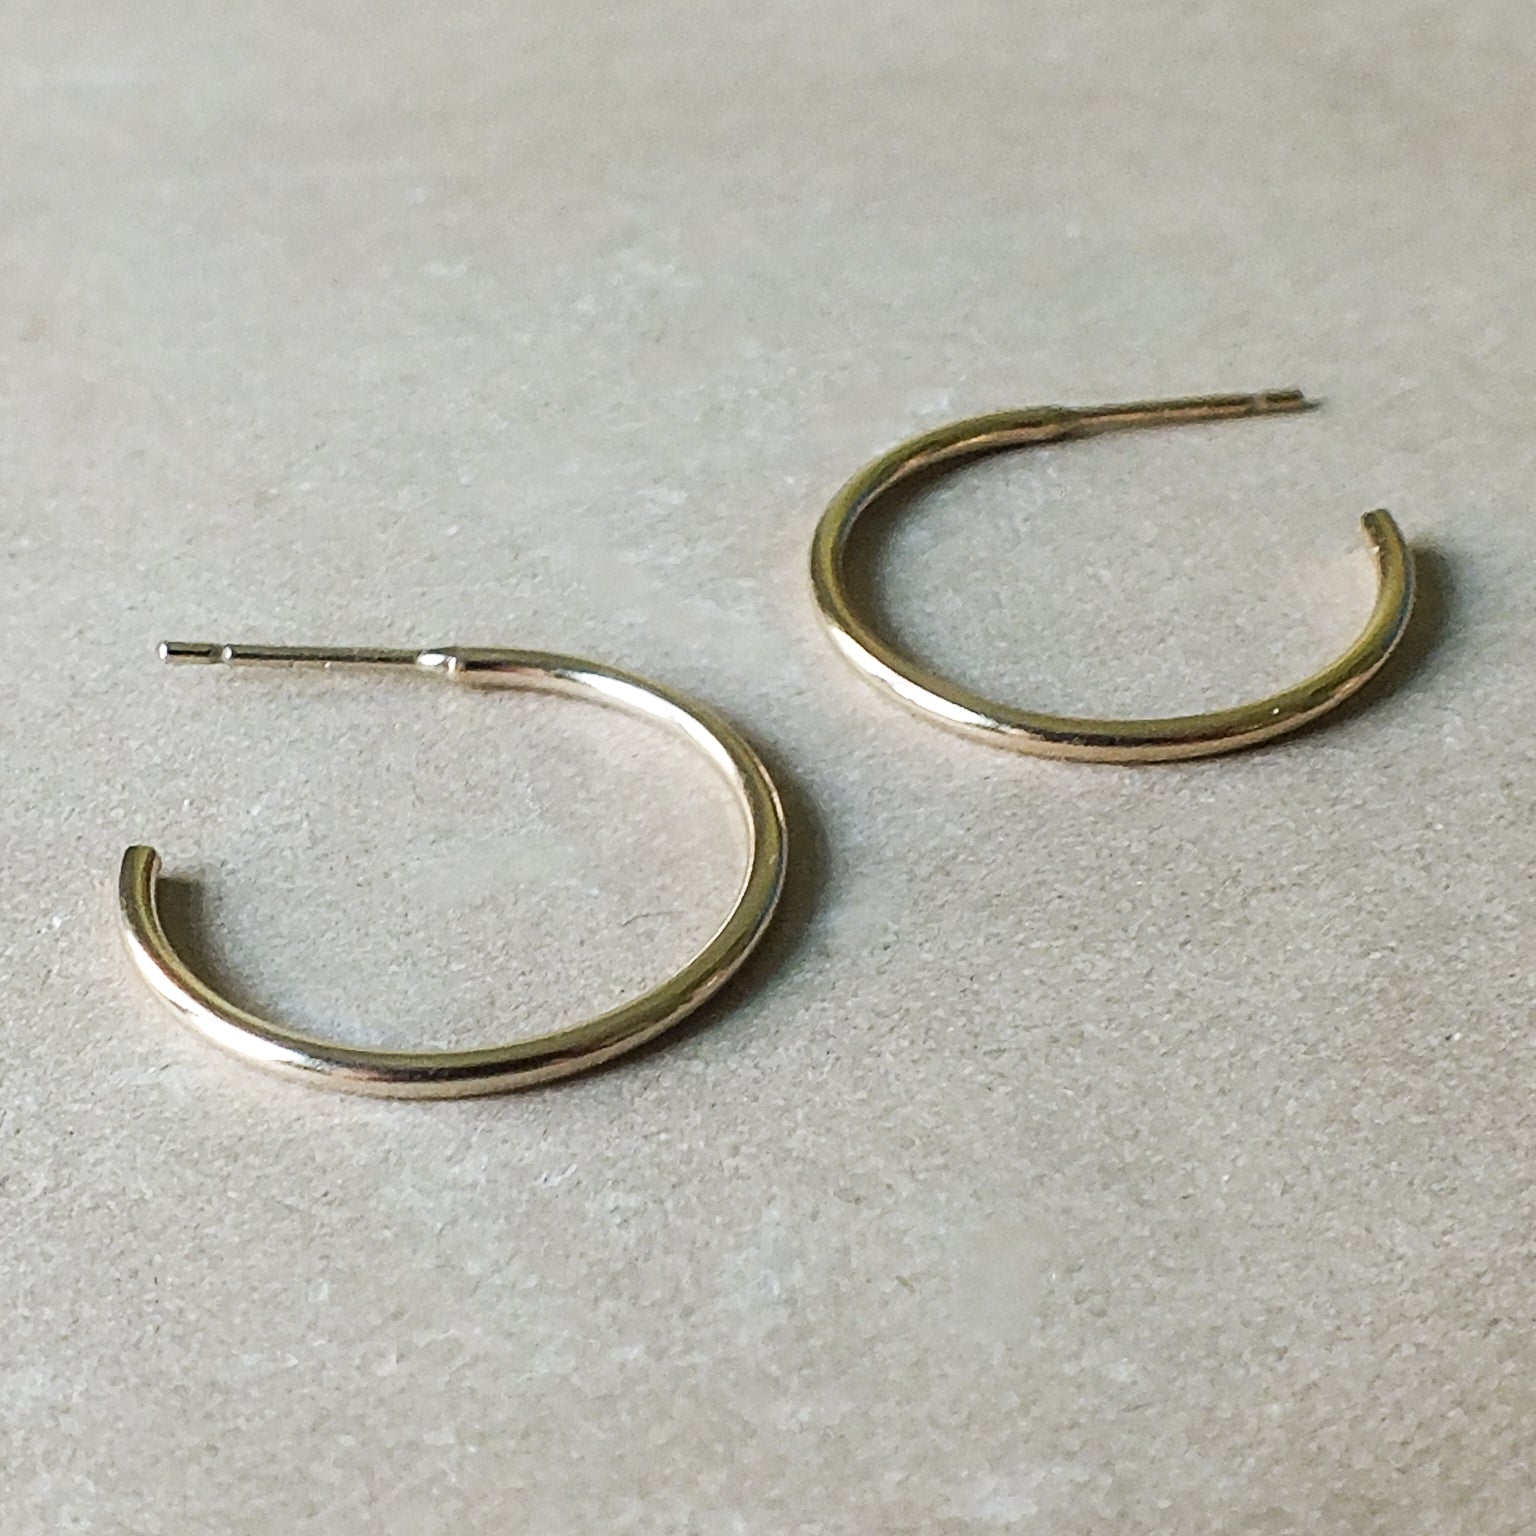 A pair of dainty large Becoming Jewelry open hoop earrings on a plain surface.